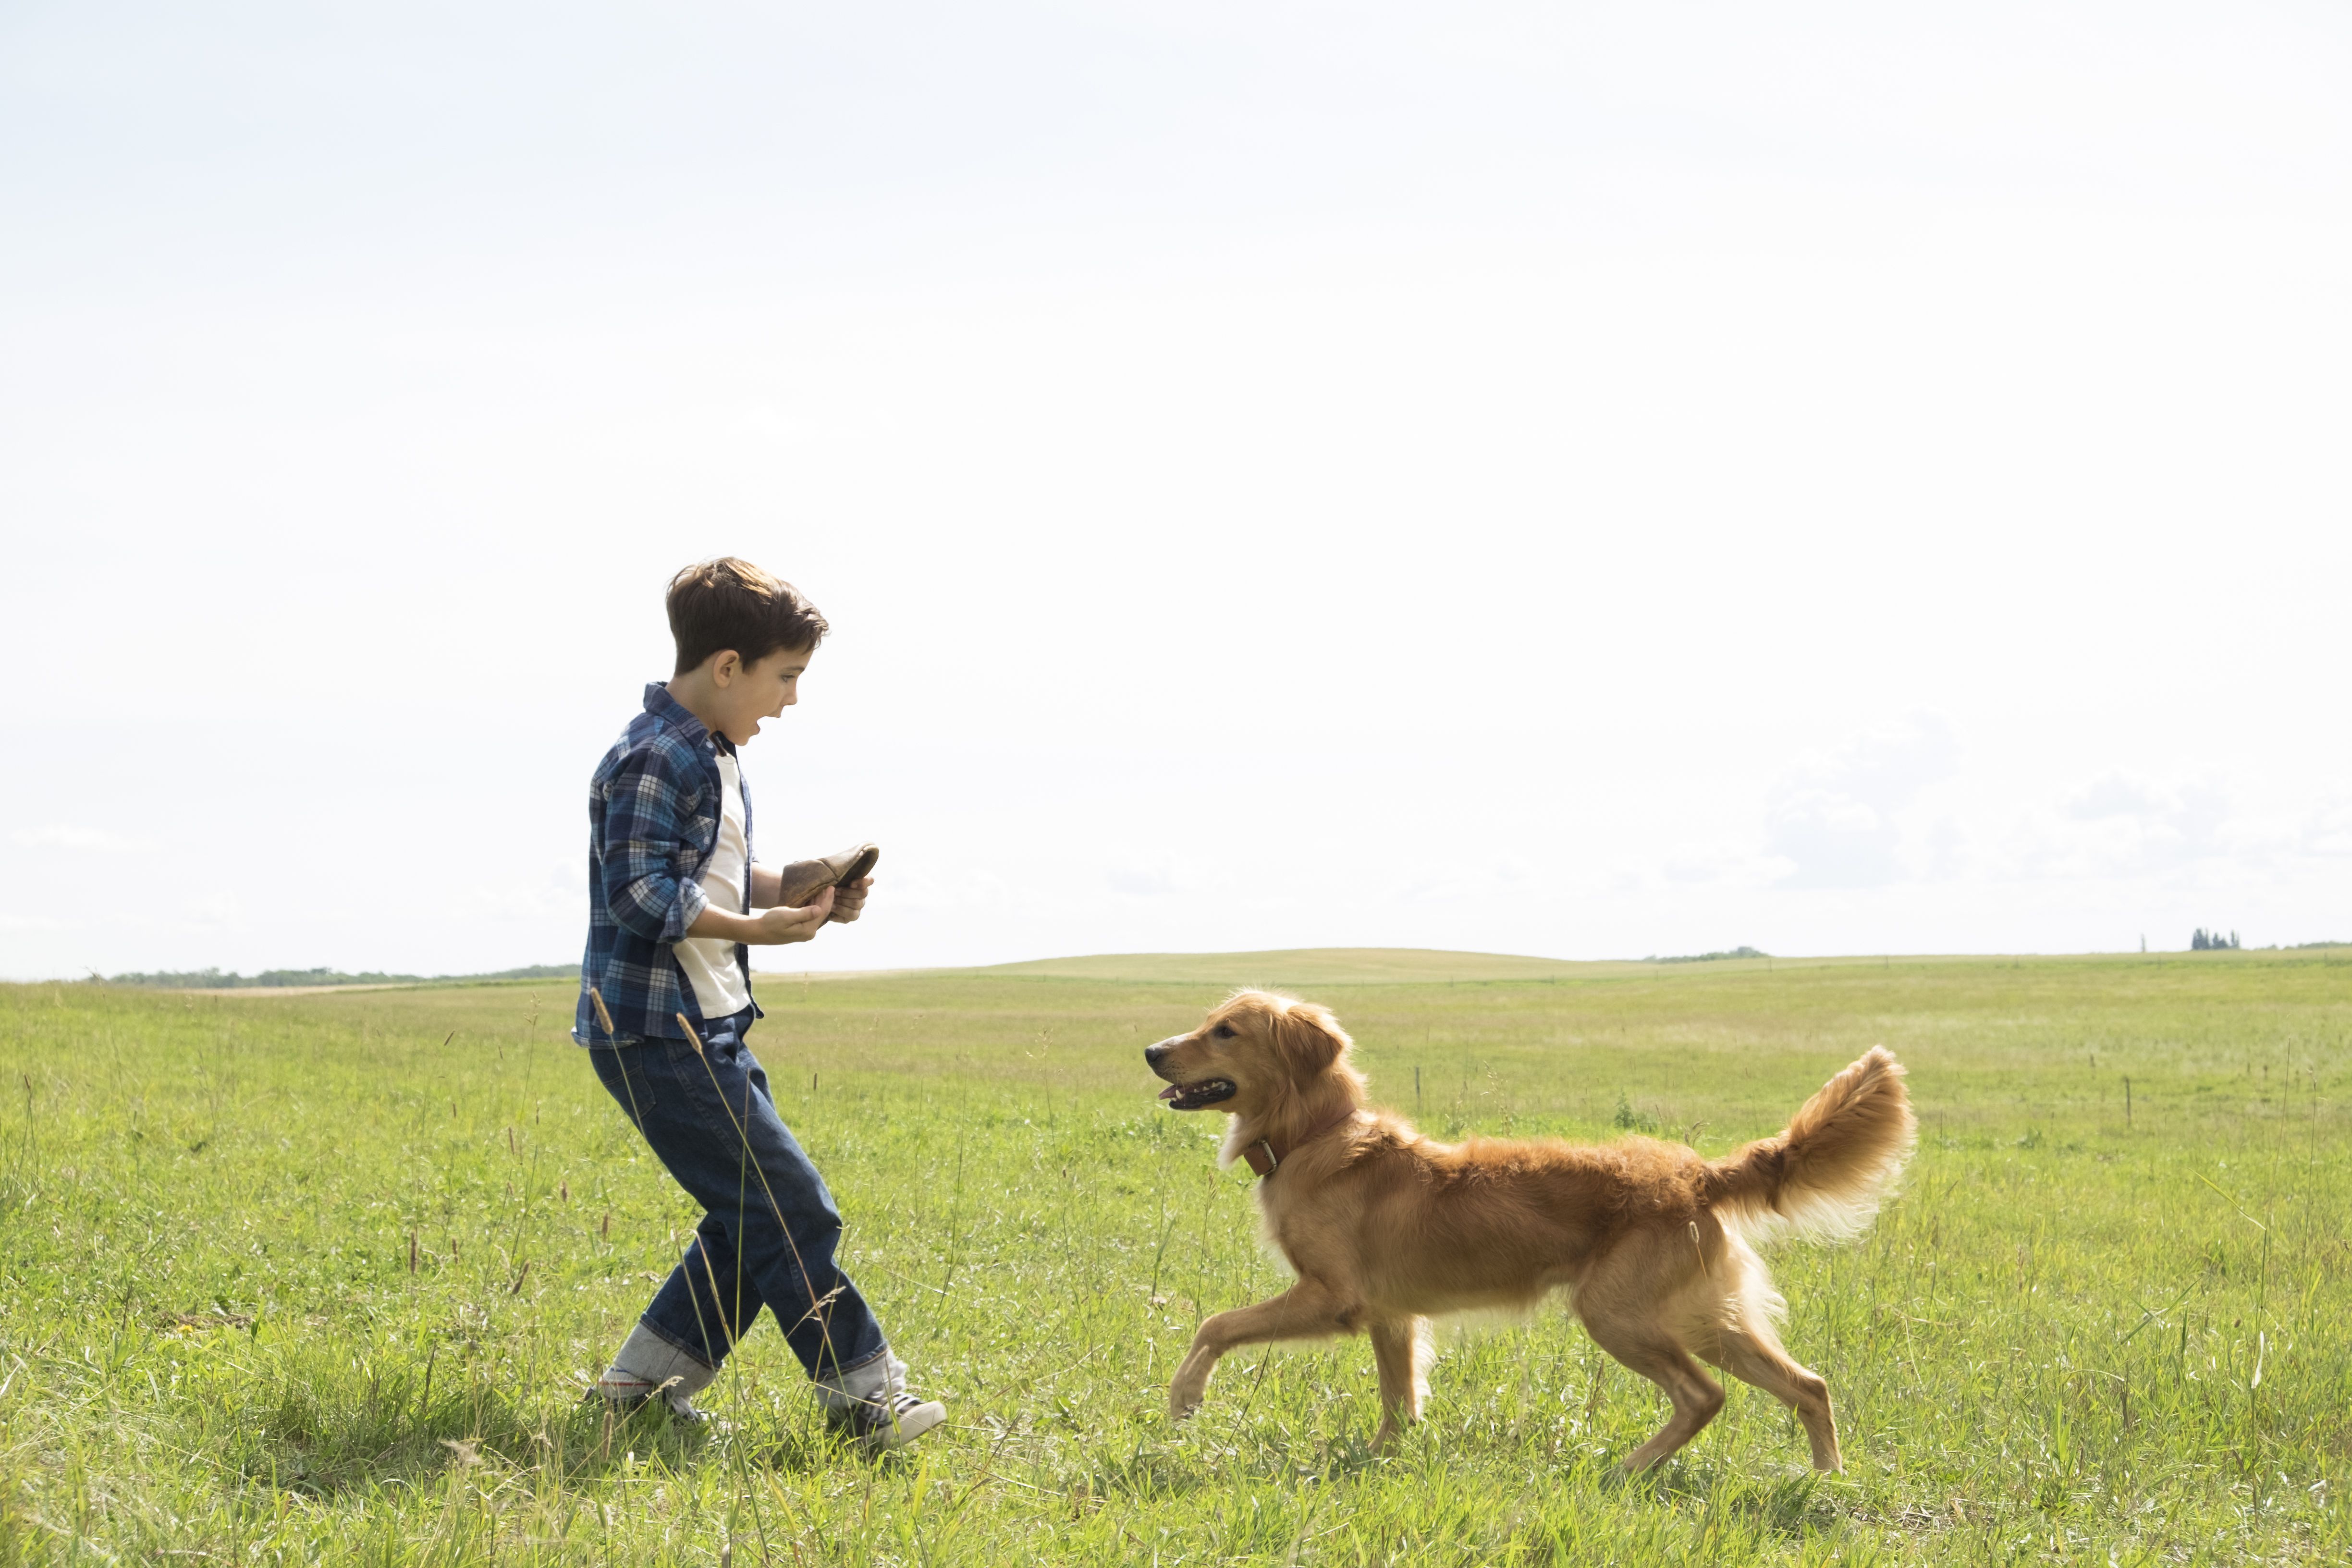 A Dog's Purpose Wallpaper Image Photo Picture Background